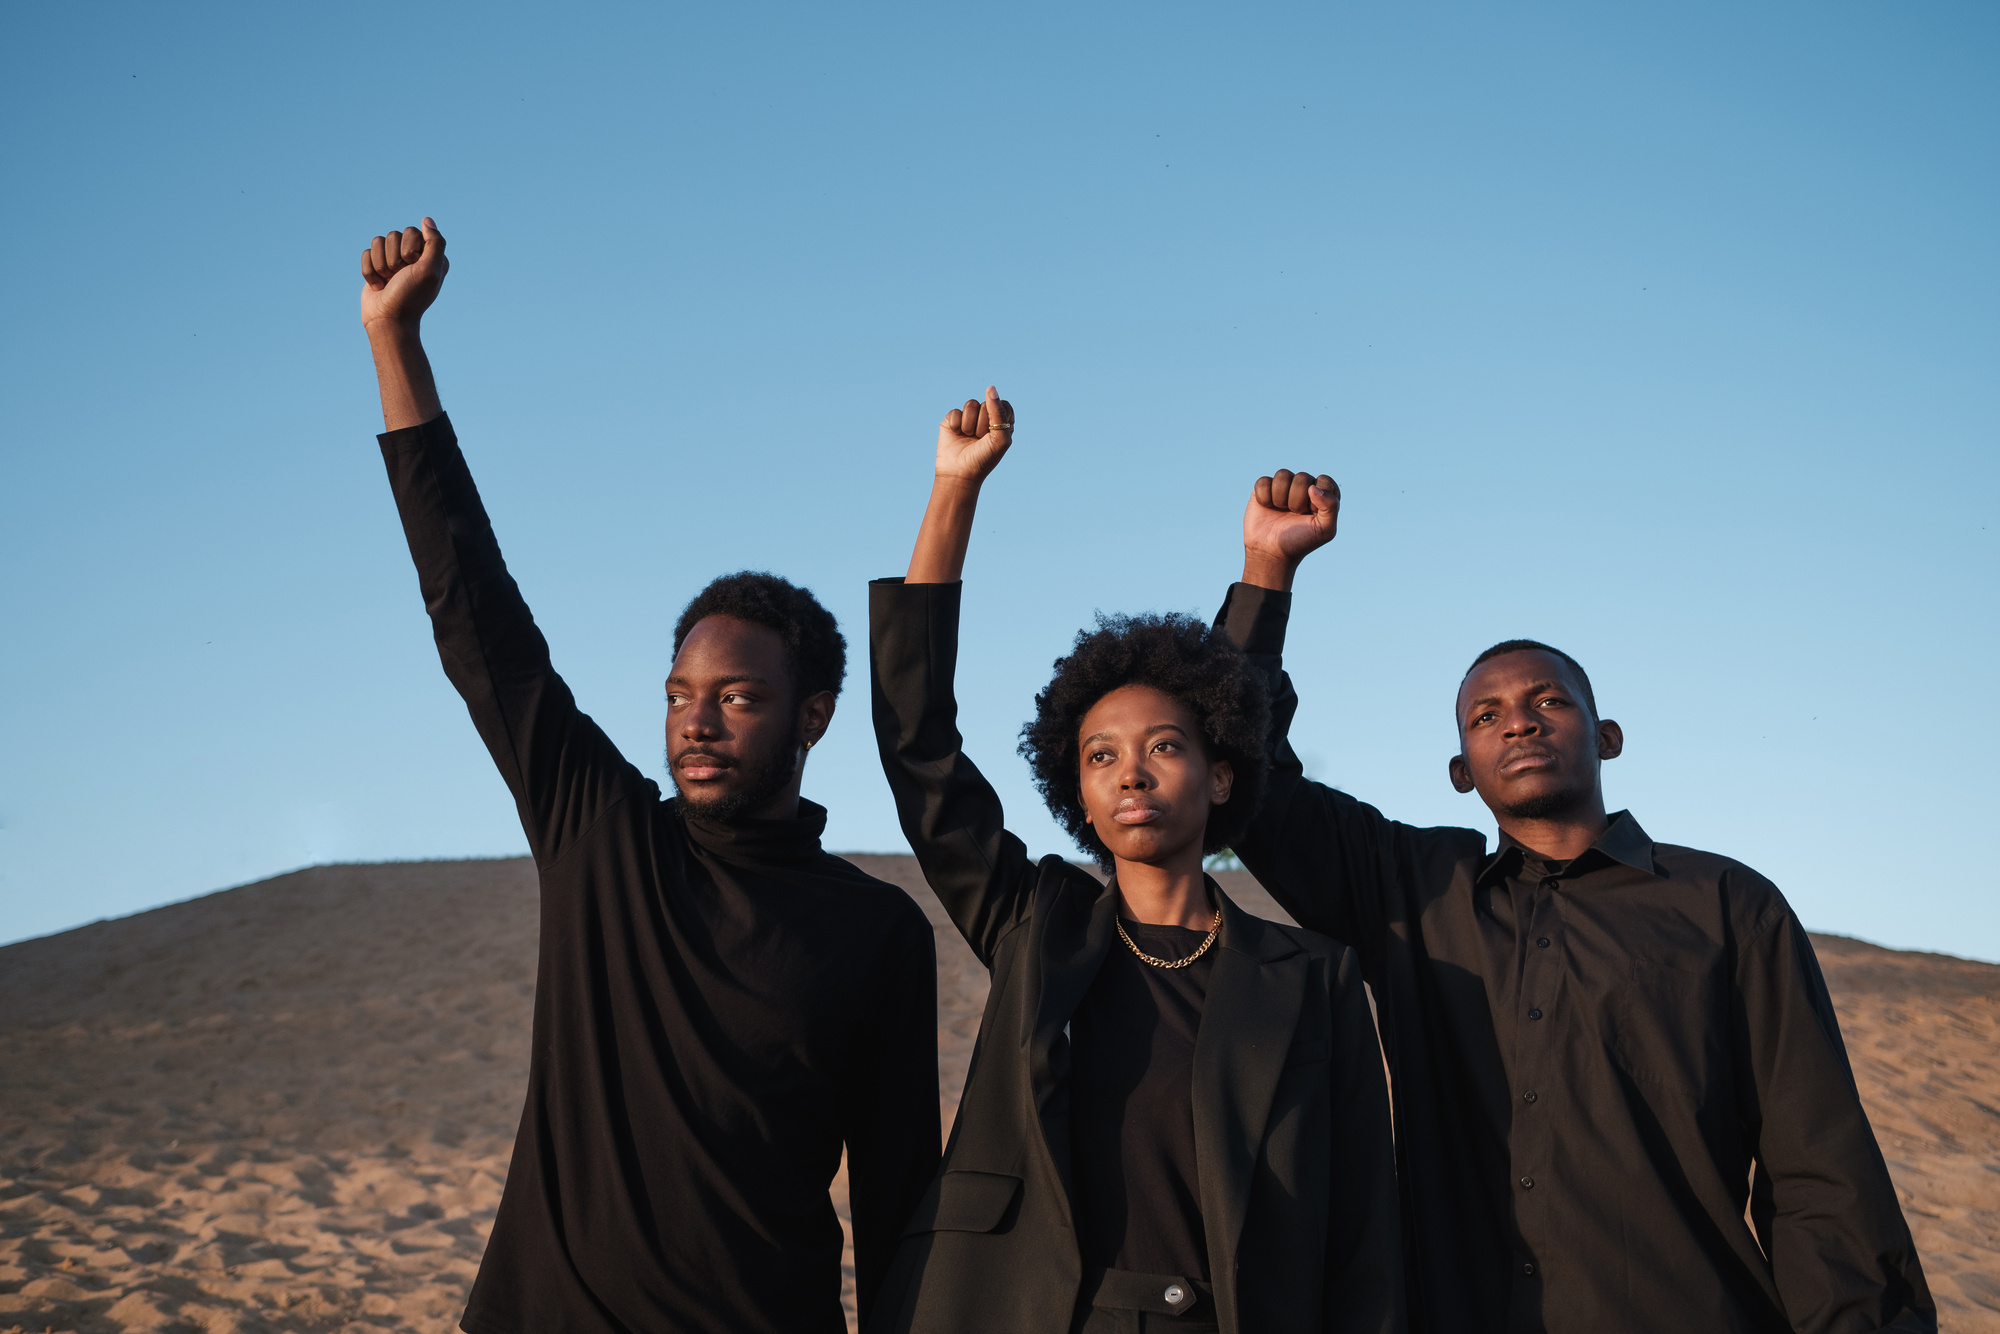 Three Diverse People in Black Outfit Raising Their Fist Outdoors